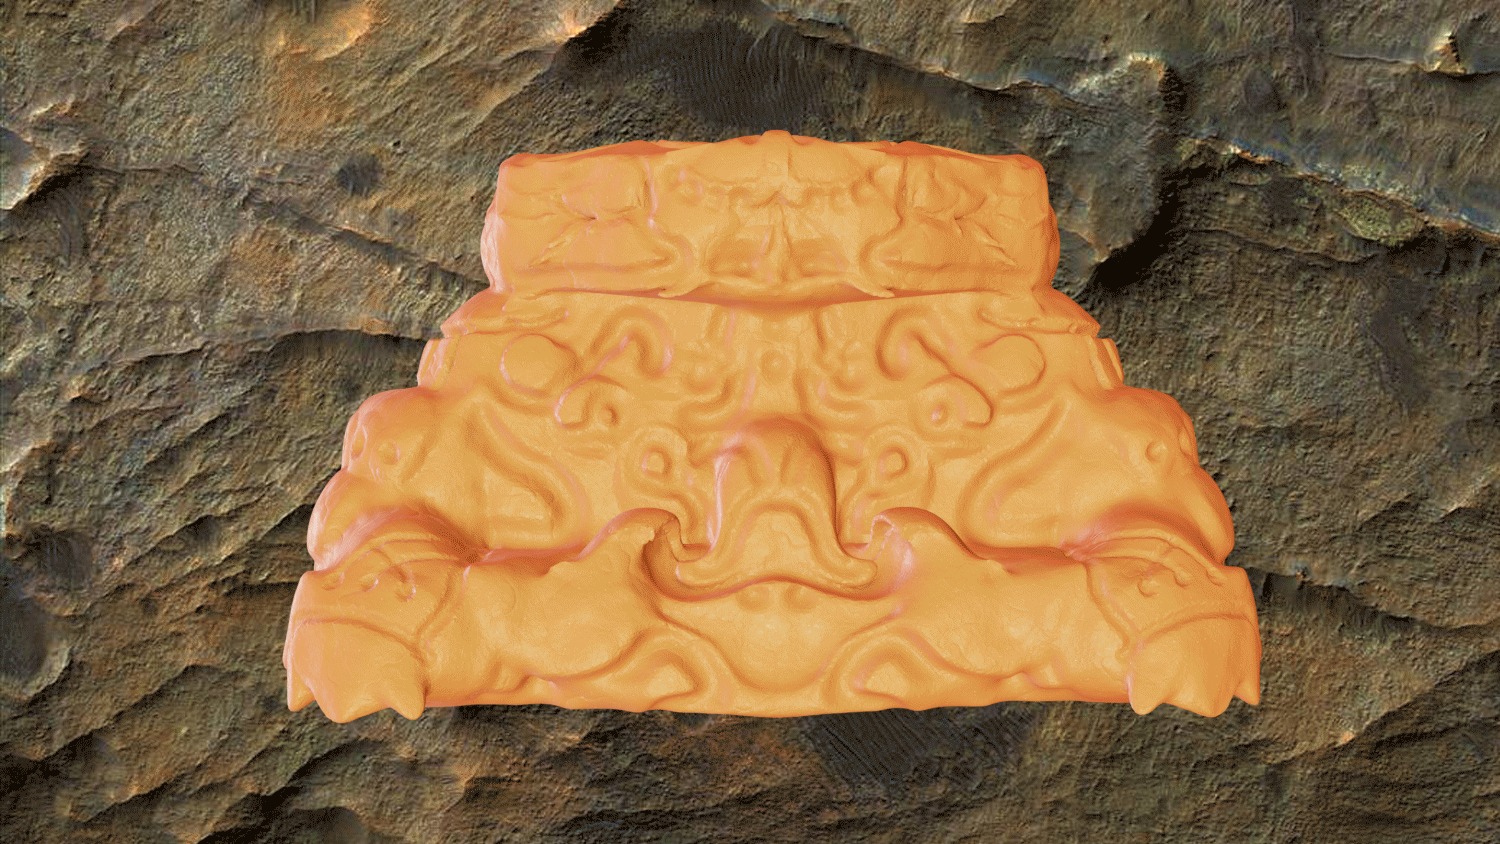 An orange clay-like figurine with a rectangular shape and etchings inscribed into its surface rotates against a luminescent background of rocks.